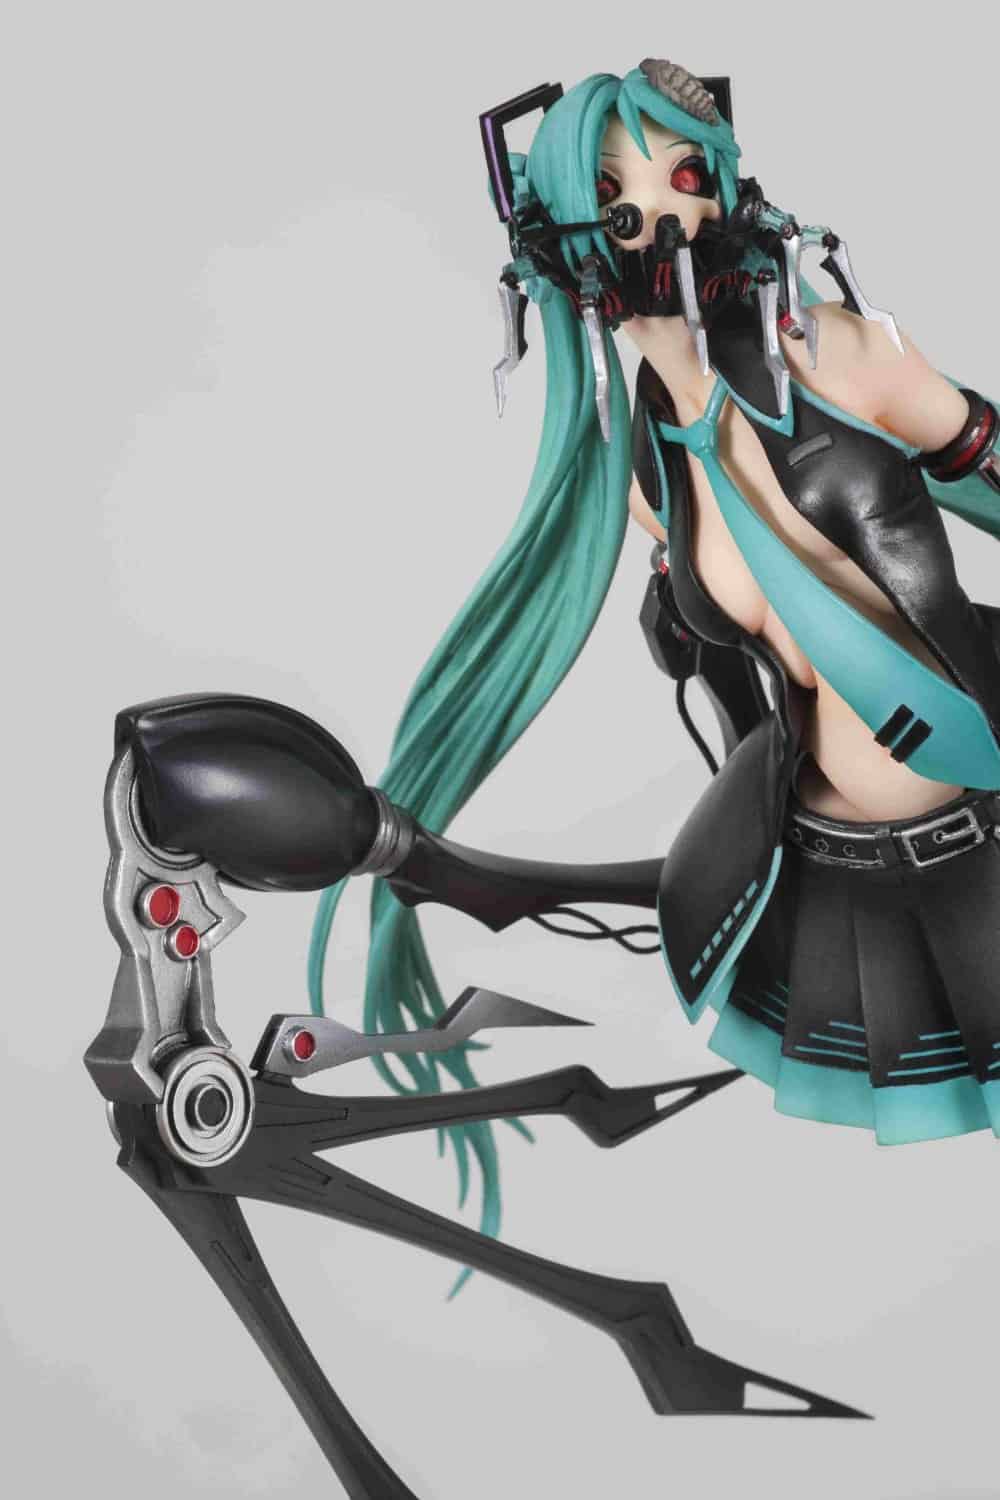 Union Creative H Series Calne Ca Vocaloid Figure Fanmade Character